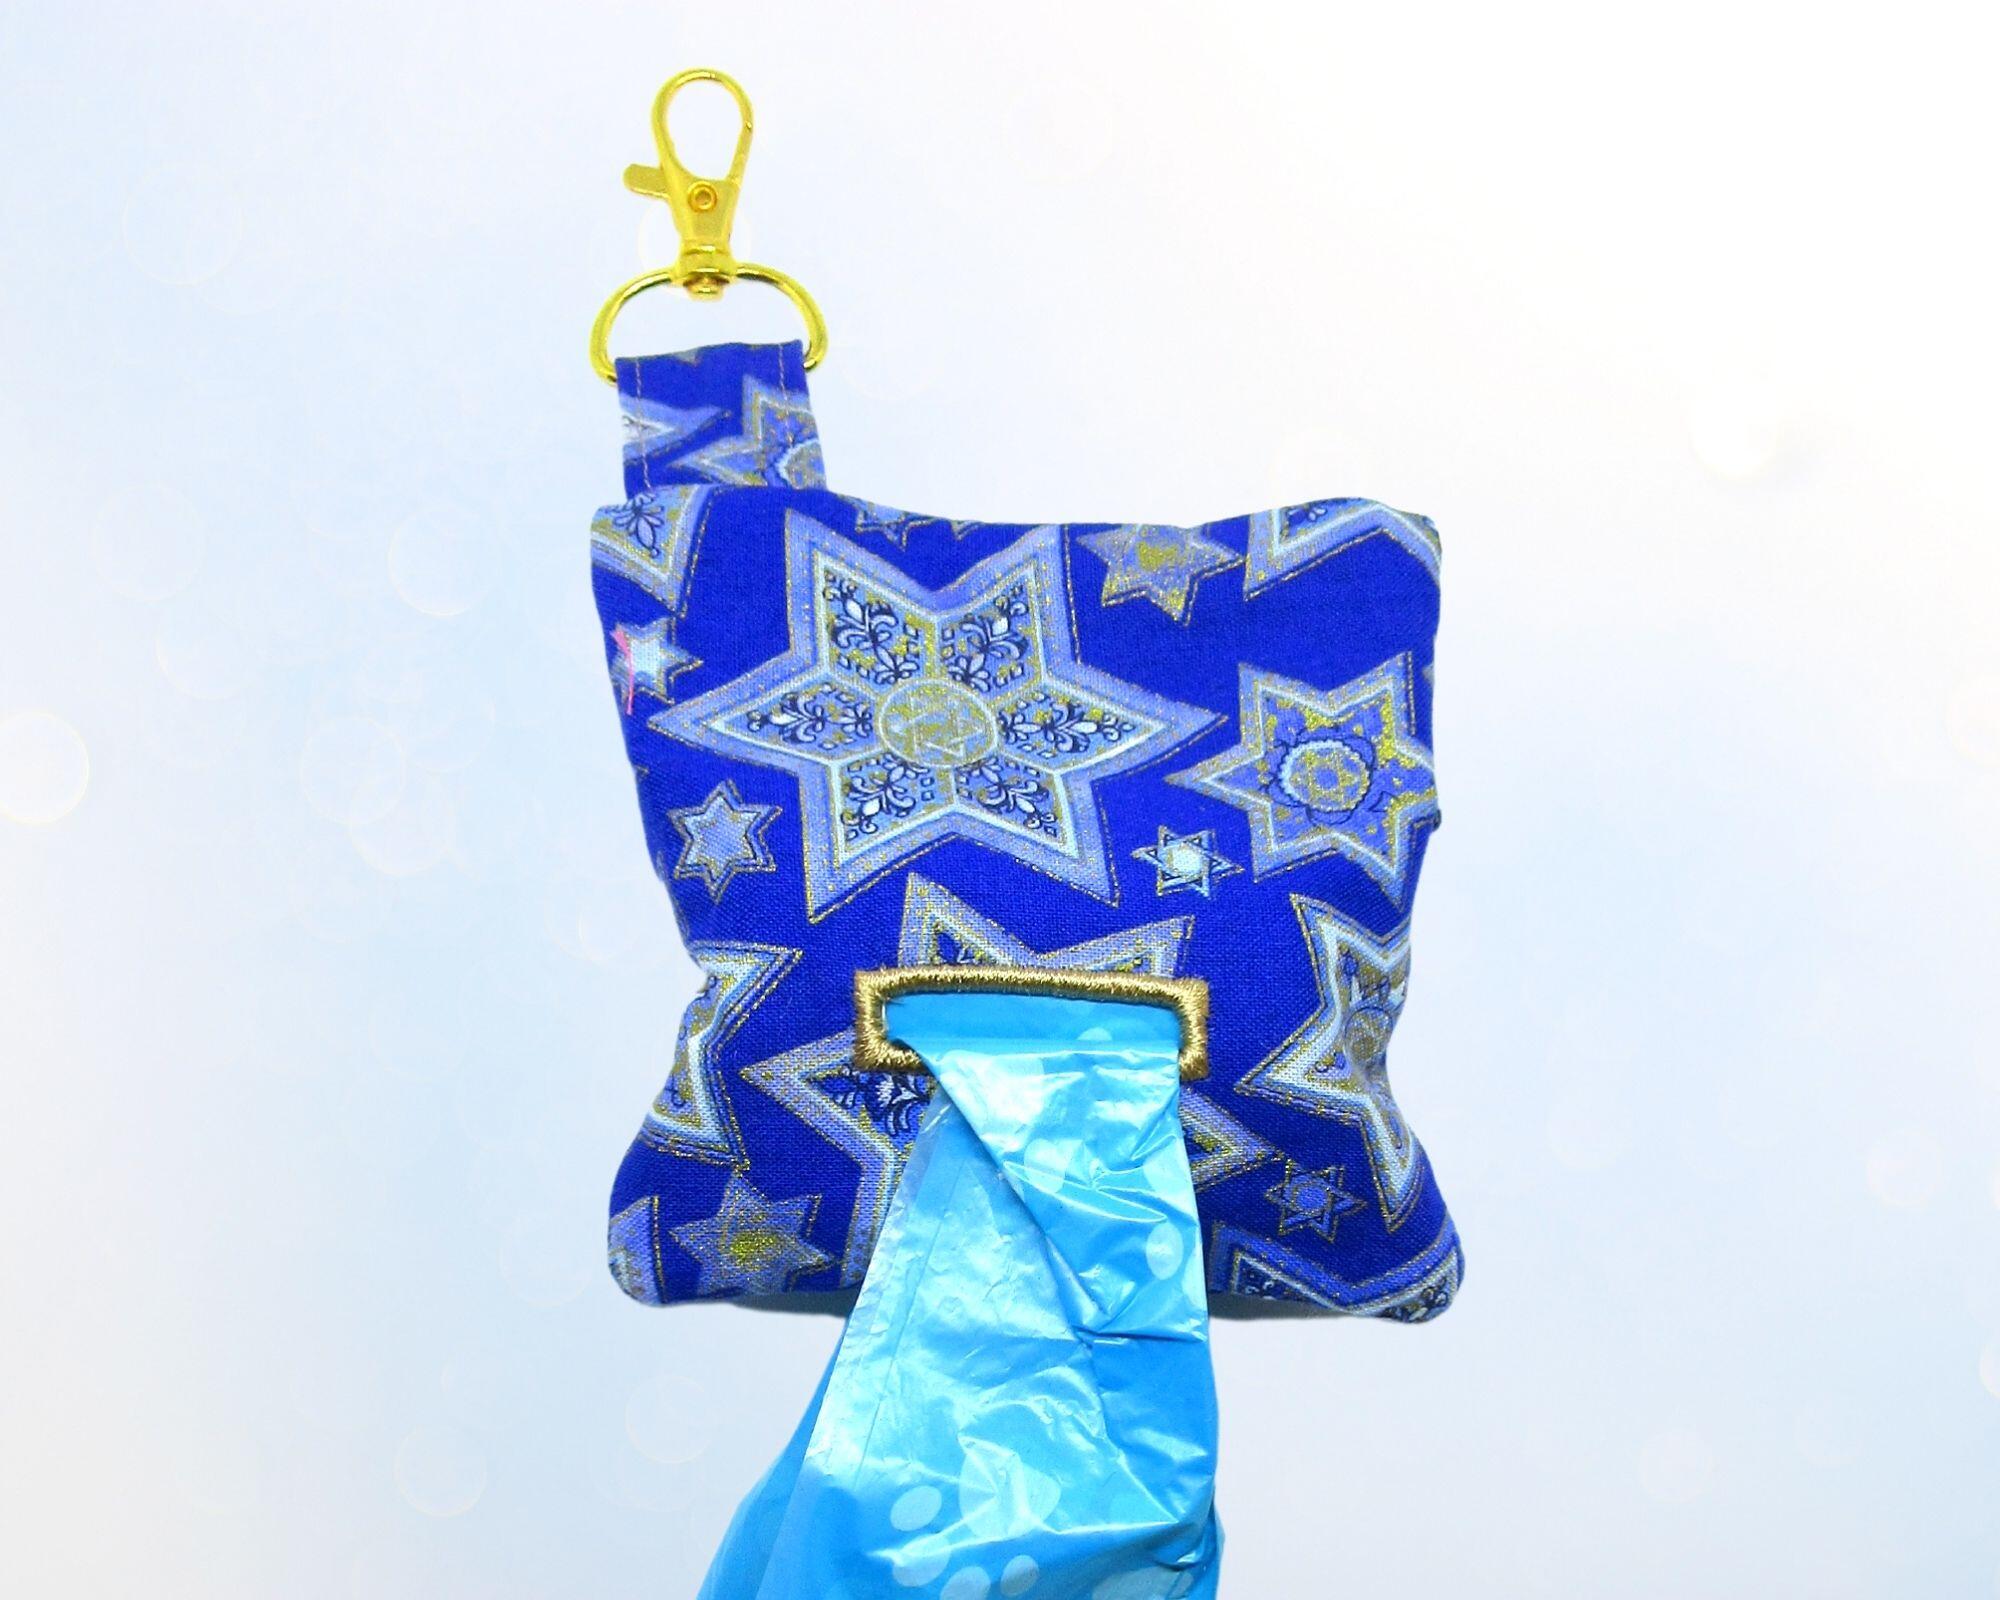 showing bag Jewish star 6 points blue and gold with gold tone hardware Multi purpose pouch Handmade by a Fur Baby Favorite dog poop bag holder waste bag dispenser training treat pouch binky pacifier bag change purse pouch